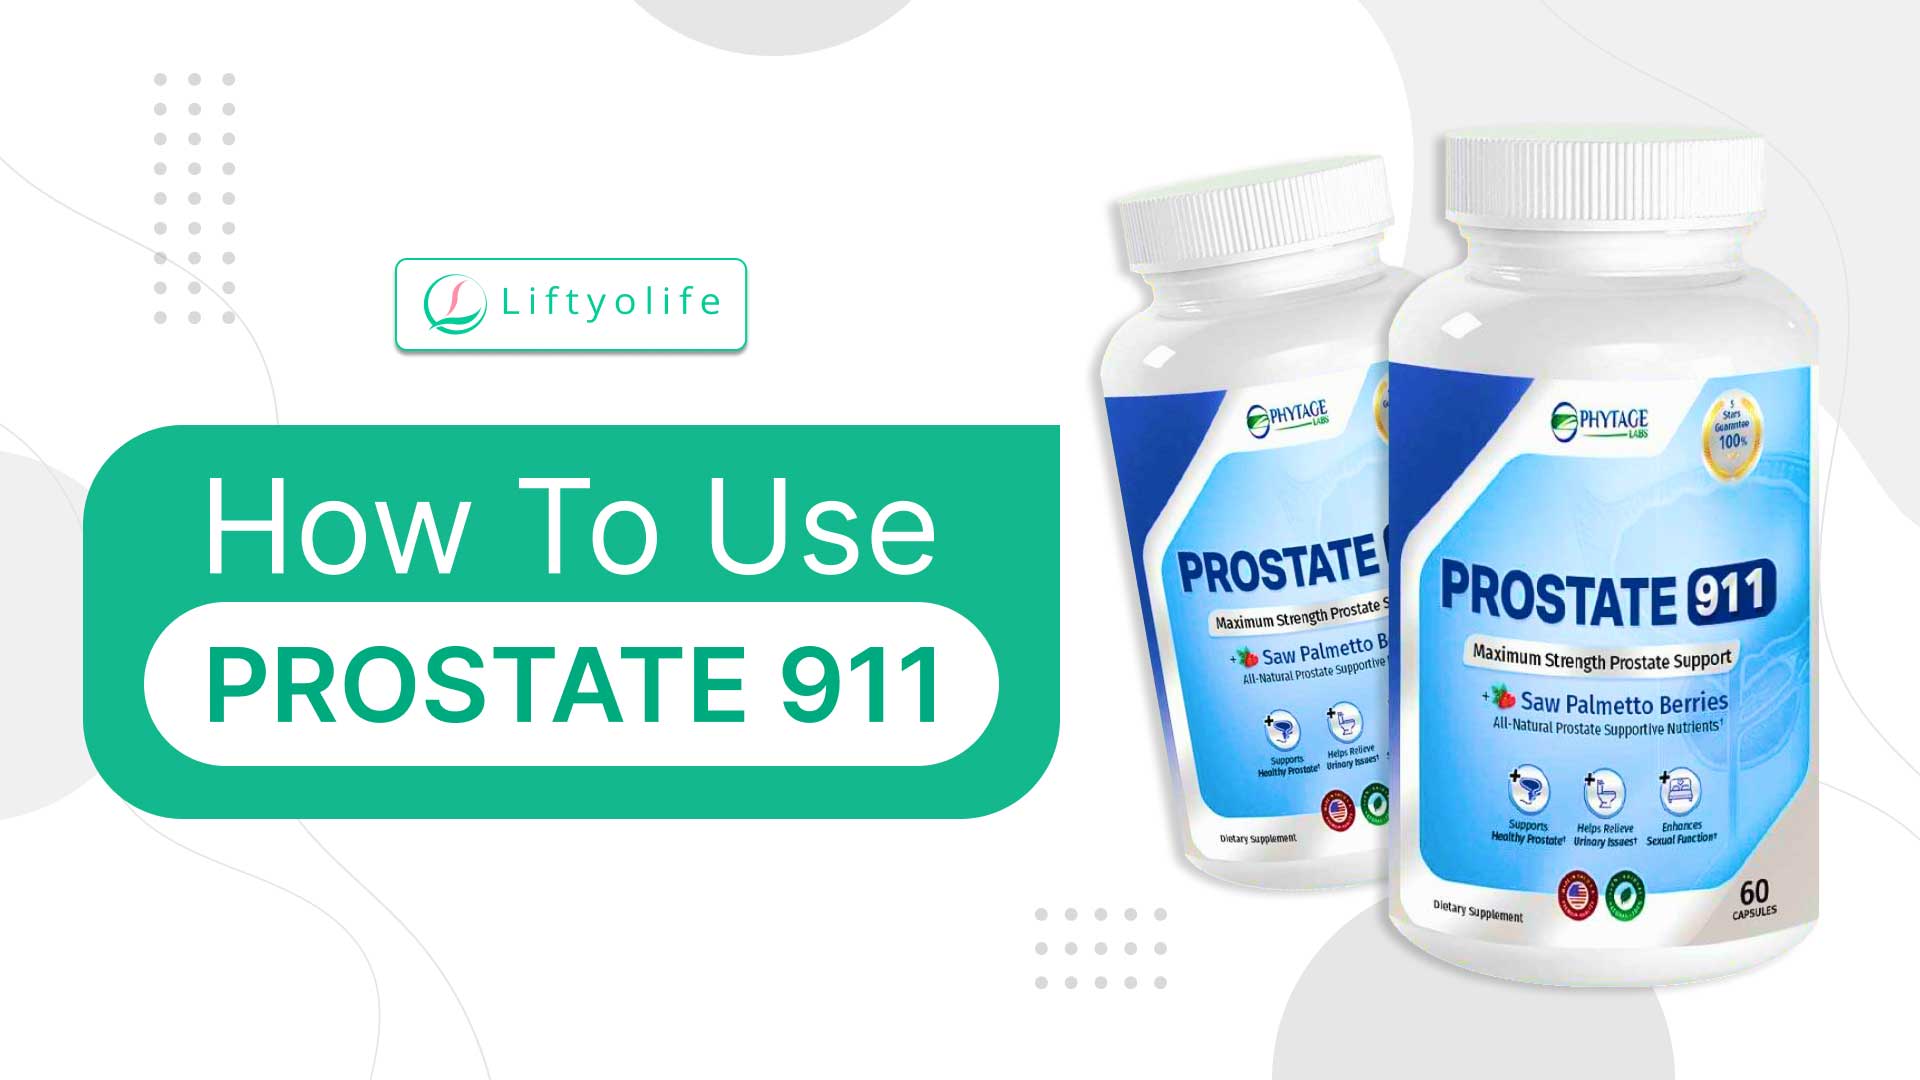 How To Use Prostate 911